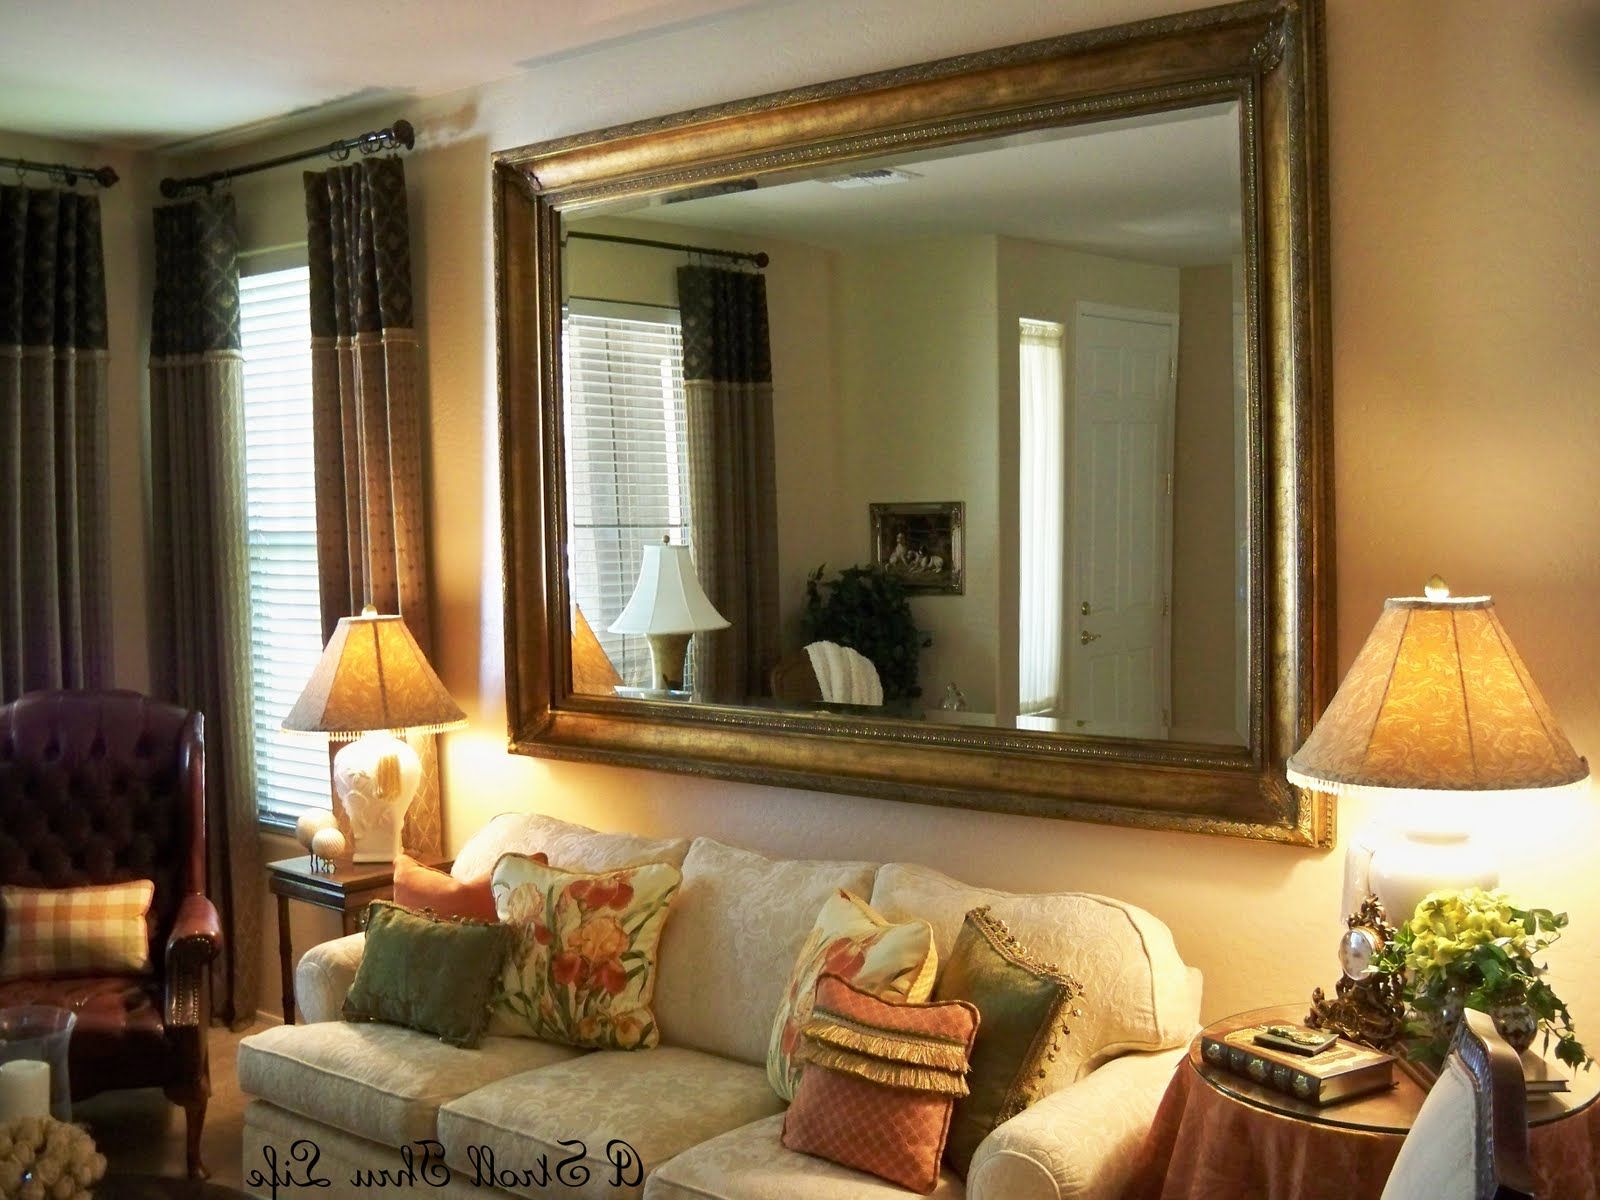 Popular Large Wall Mirrors For Living Room With Living Room Design: Big Decorative Wall Mirrors Design, Wall Mirrors (View 10 of 20)